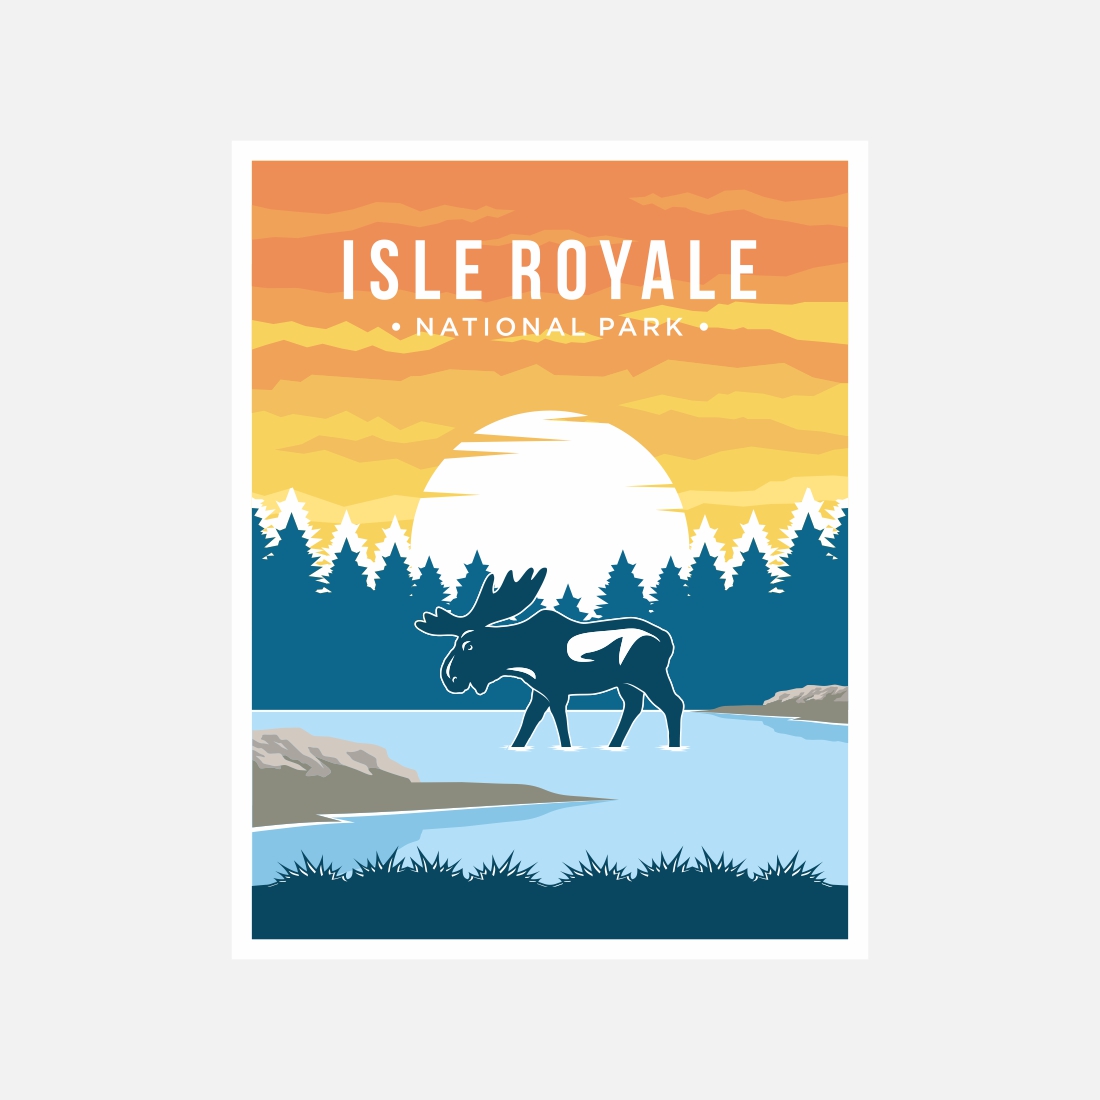 Isle Royale national park poster vector illustration design – Only $8 cover image.